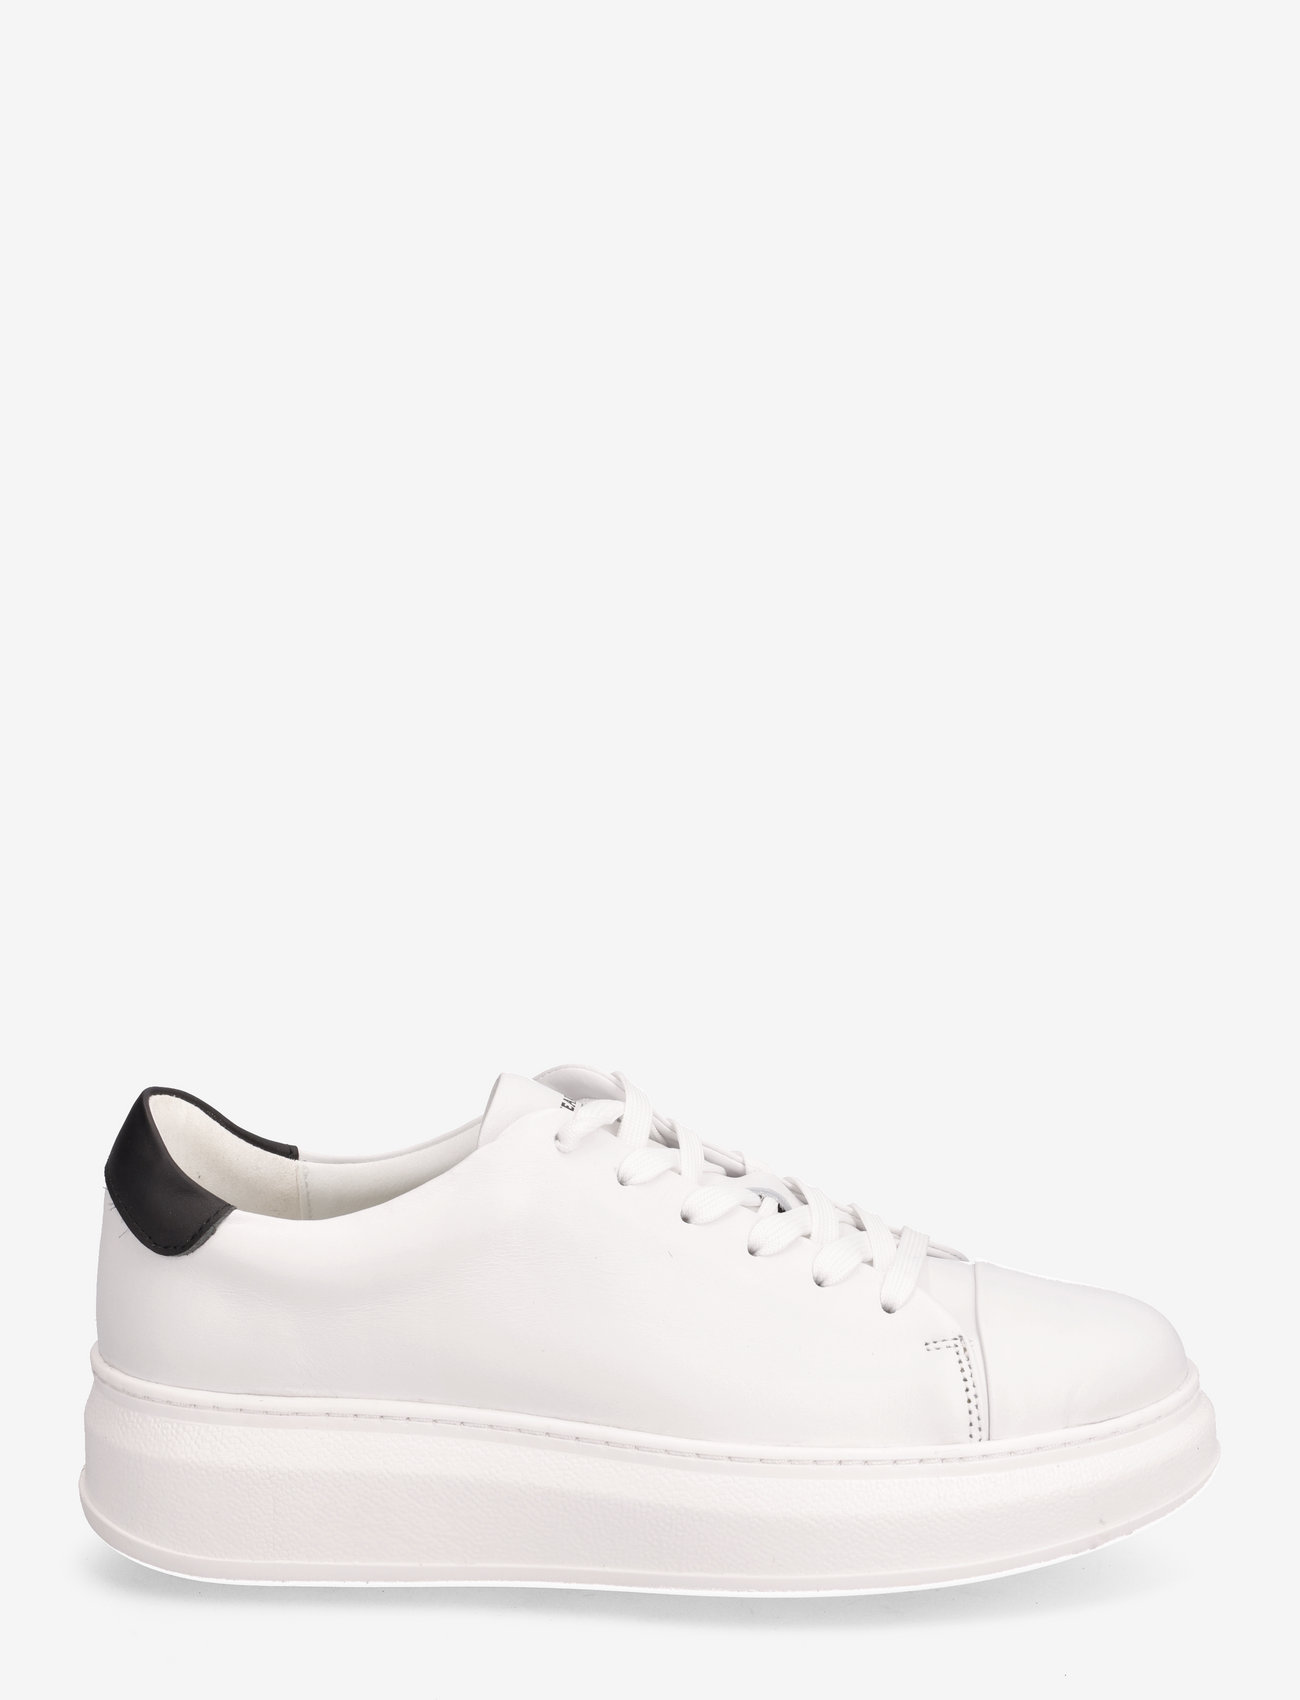 Sneaky Steve - Ayano W Leather Shoe - white - 1